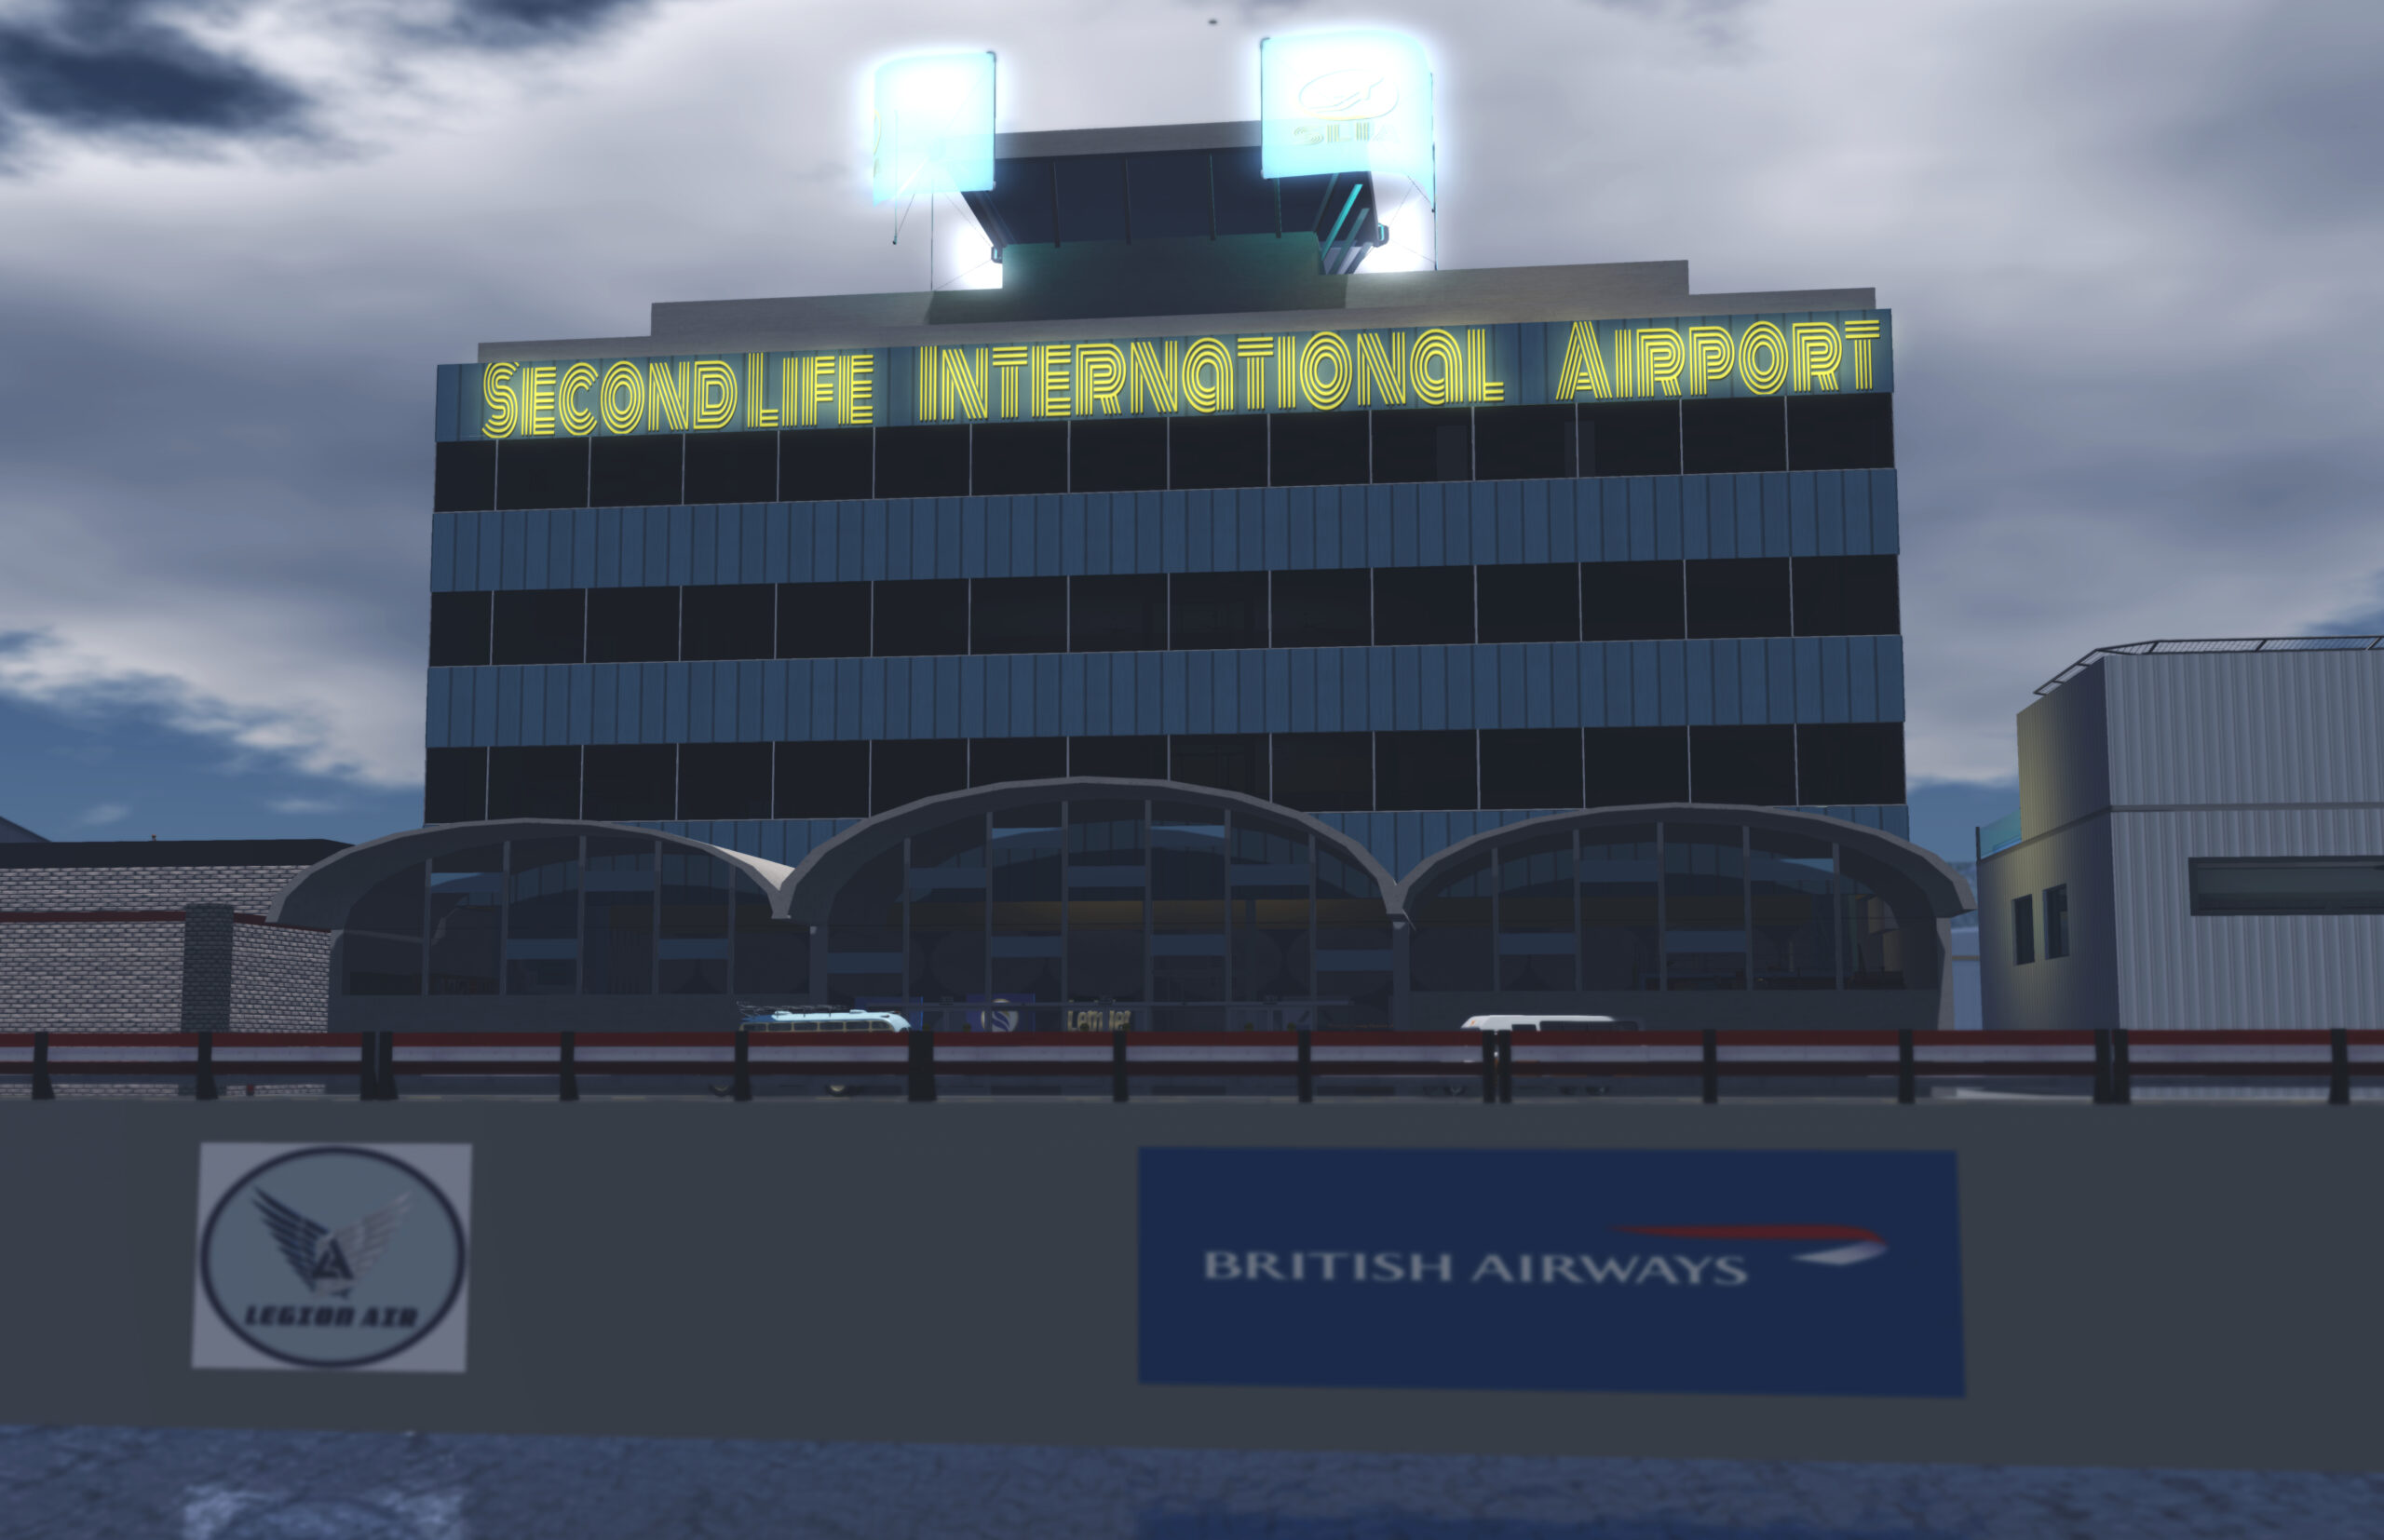 VISIT SECOND LIFE INTERNATIONAL AIRPORT AND YOU’LL BE FLOWN AWAY!